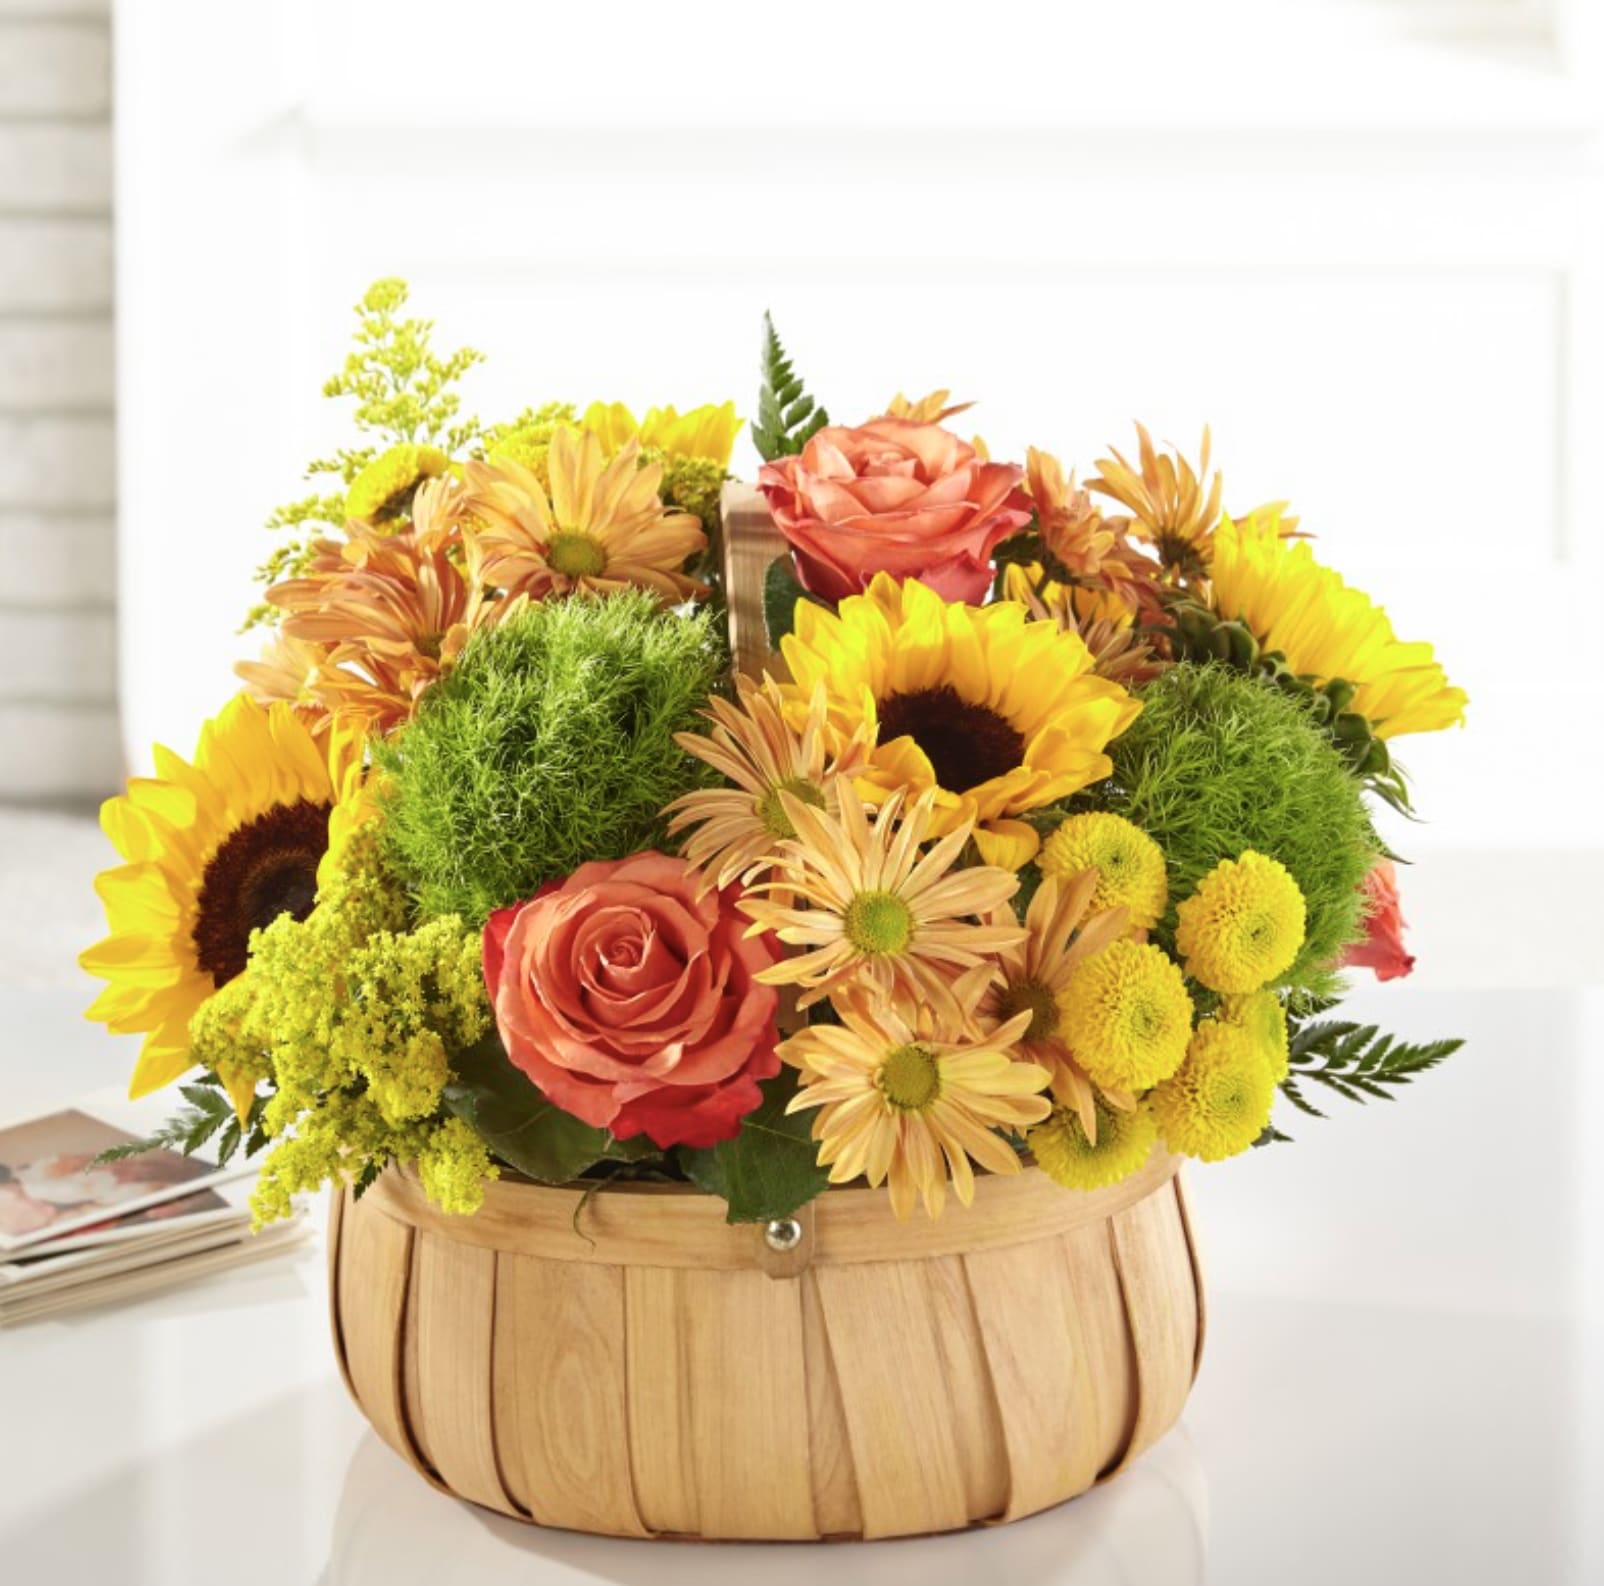 Fall Joy Bouquet - Beautiful bouquet filled with fall daisies, sunflowers and roses.